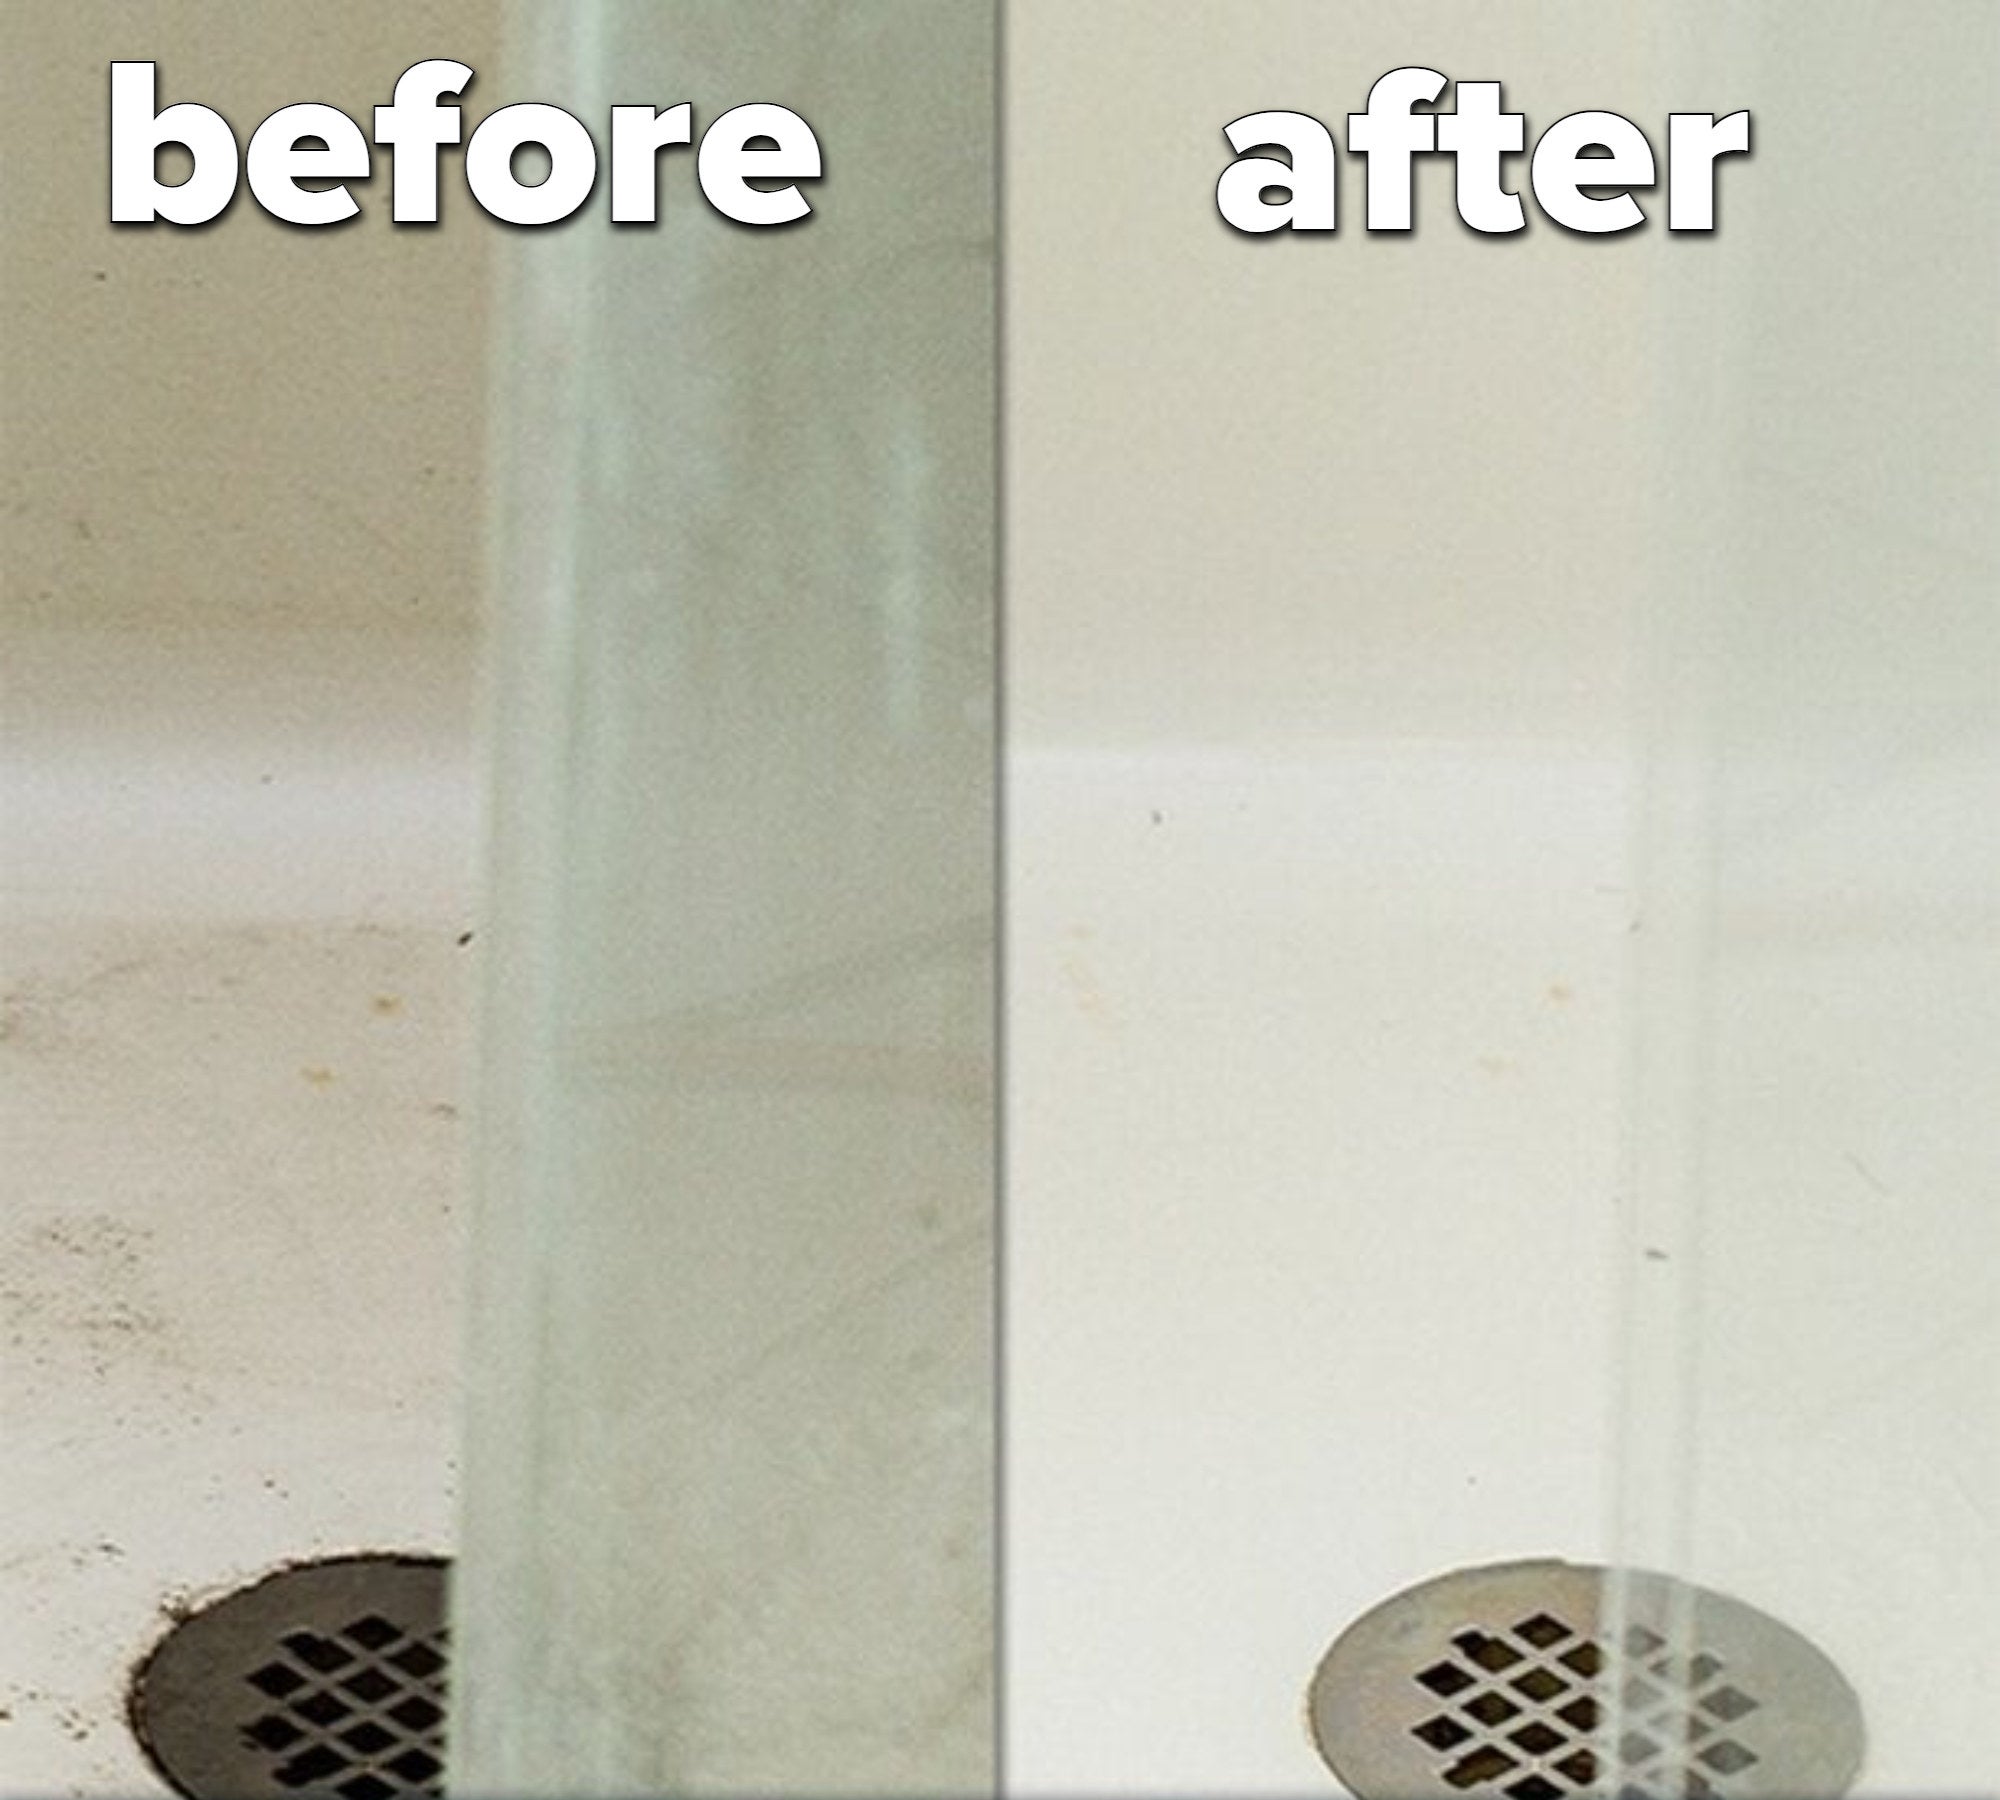 Before and after photos without and with the Wet and Forget cleaner